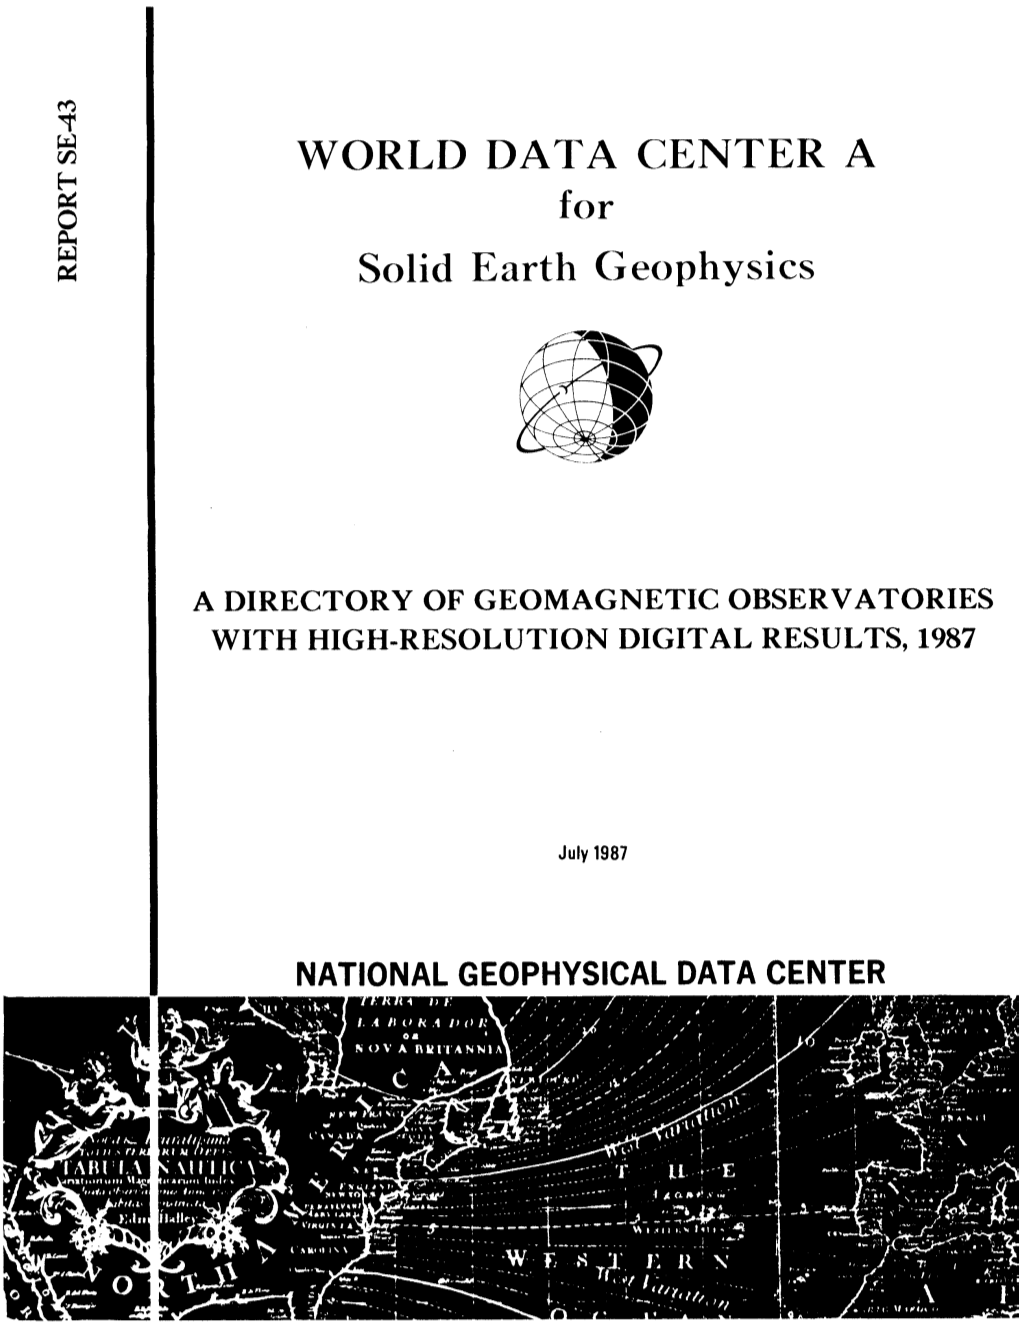 A Directory of Geomagnetic Observatories with High-Resolution Digital Results, 1987